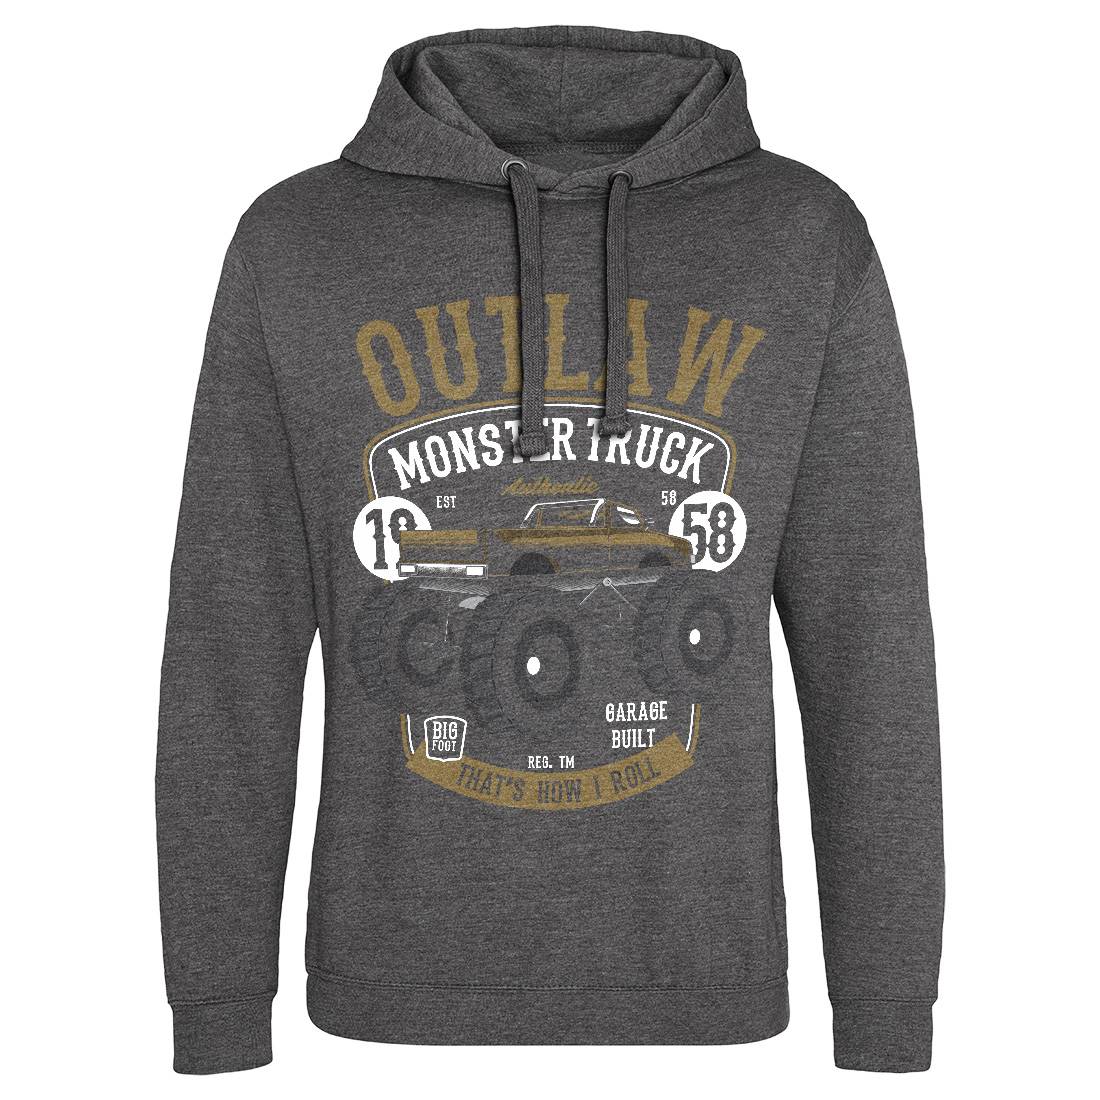 Outlaw Monster Truck Mens Hoodie Without Pocket Vehicles C408